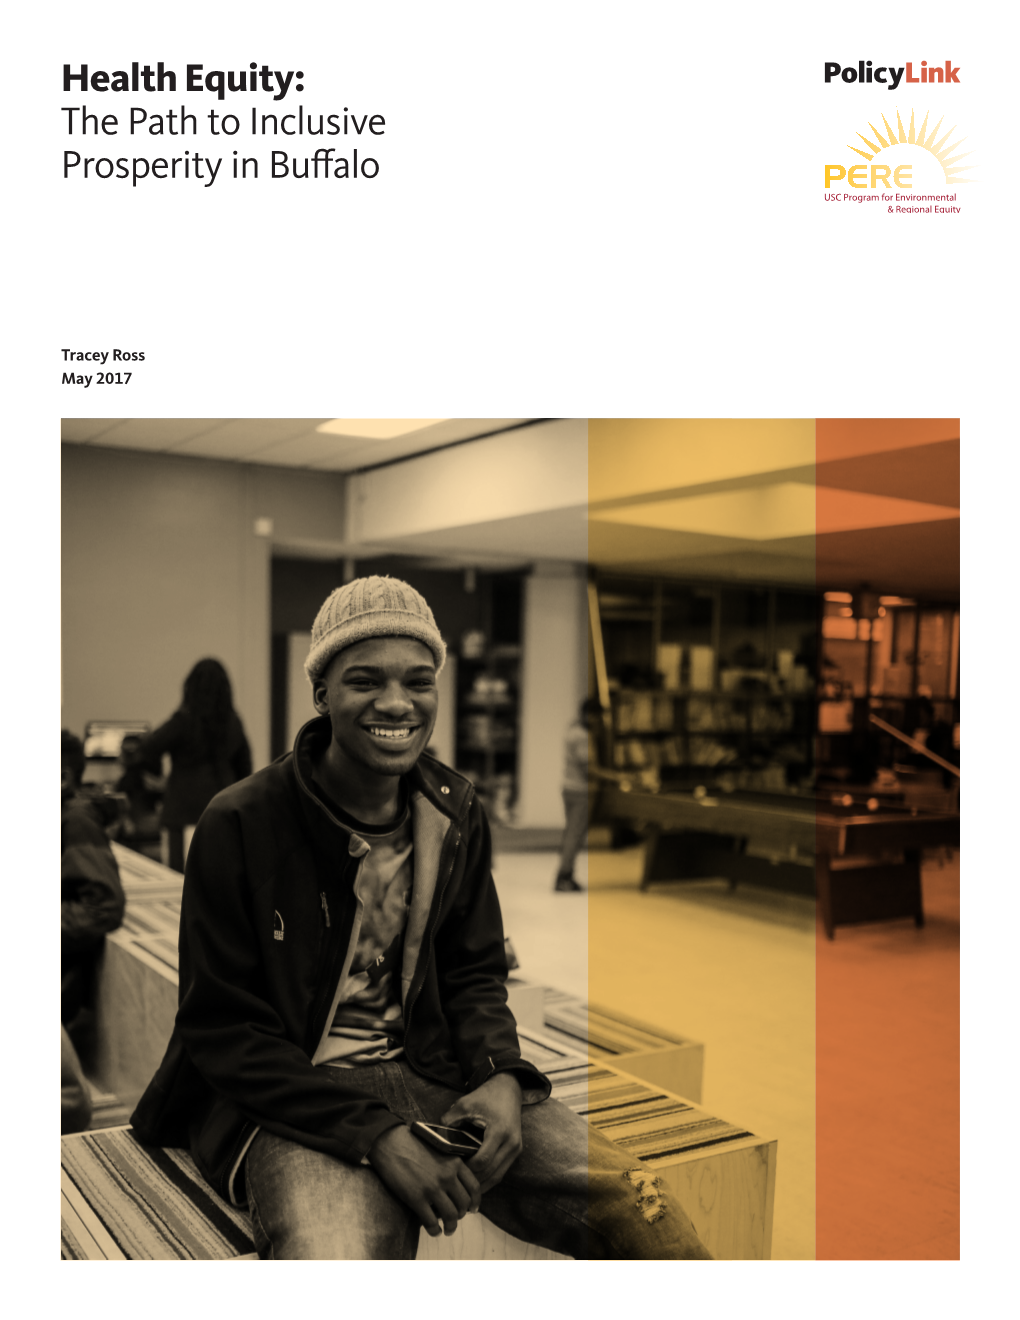 Health Equity: the Path to Inclusive Prosperity in Buffalo USC Program for Environmental & Regional Equity